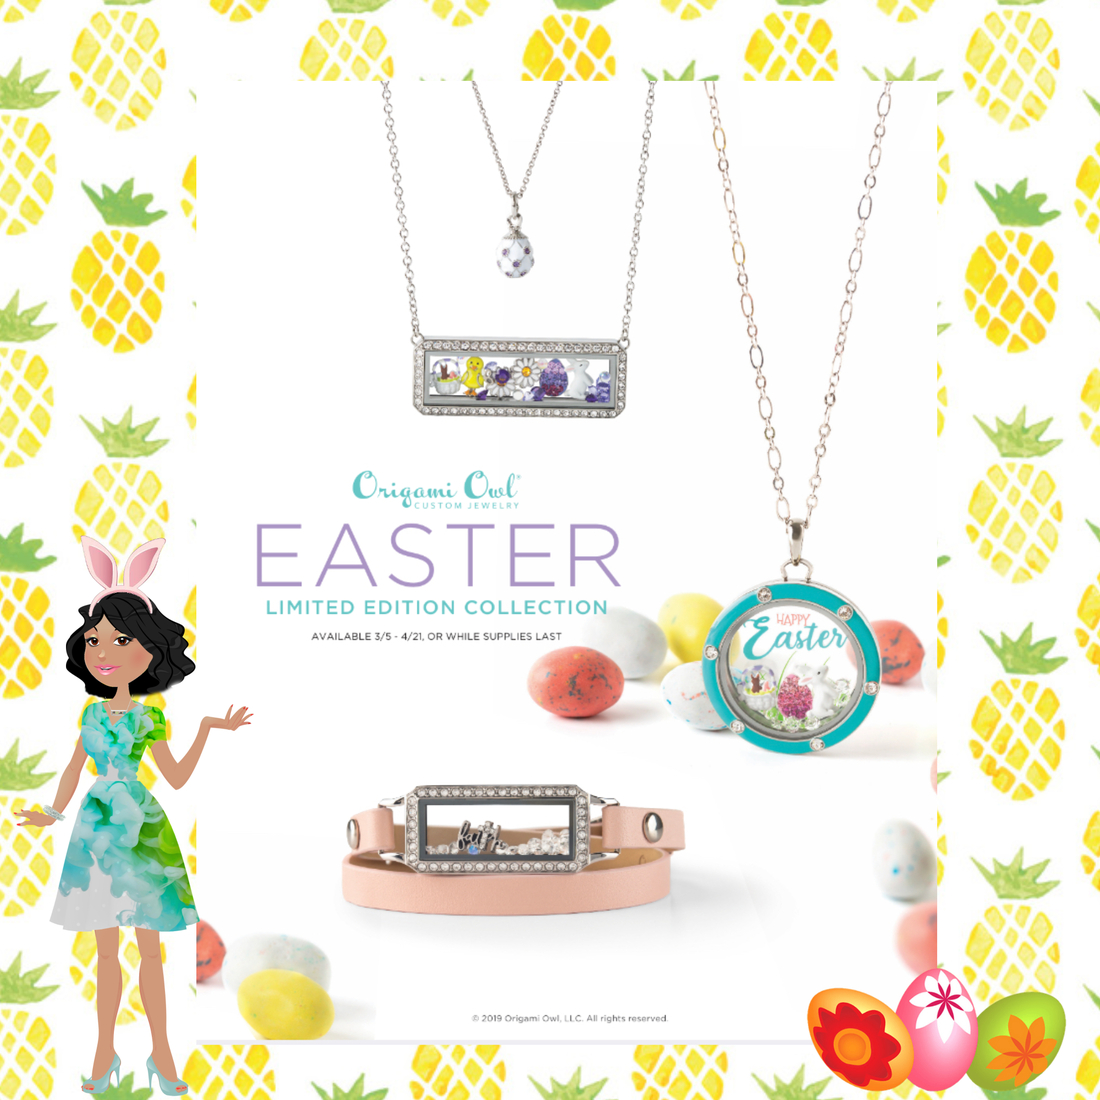 Origami Owl Tracking Origami Owl Limited Edition Easter Collection 2019 Direct Sales